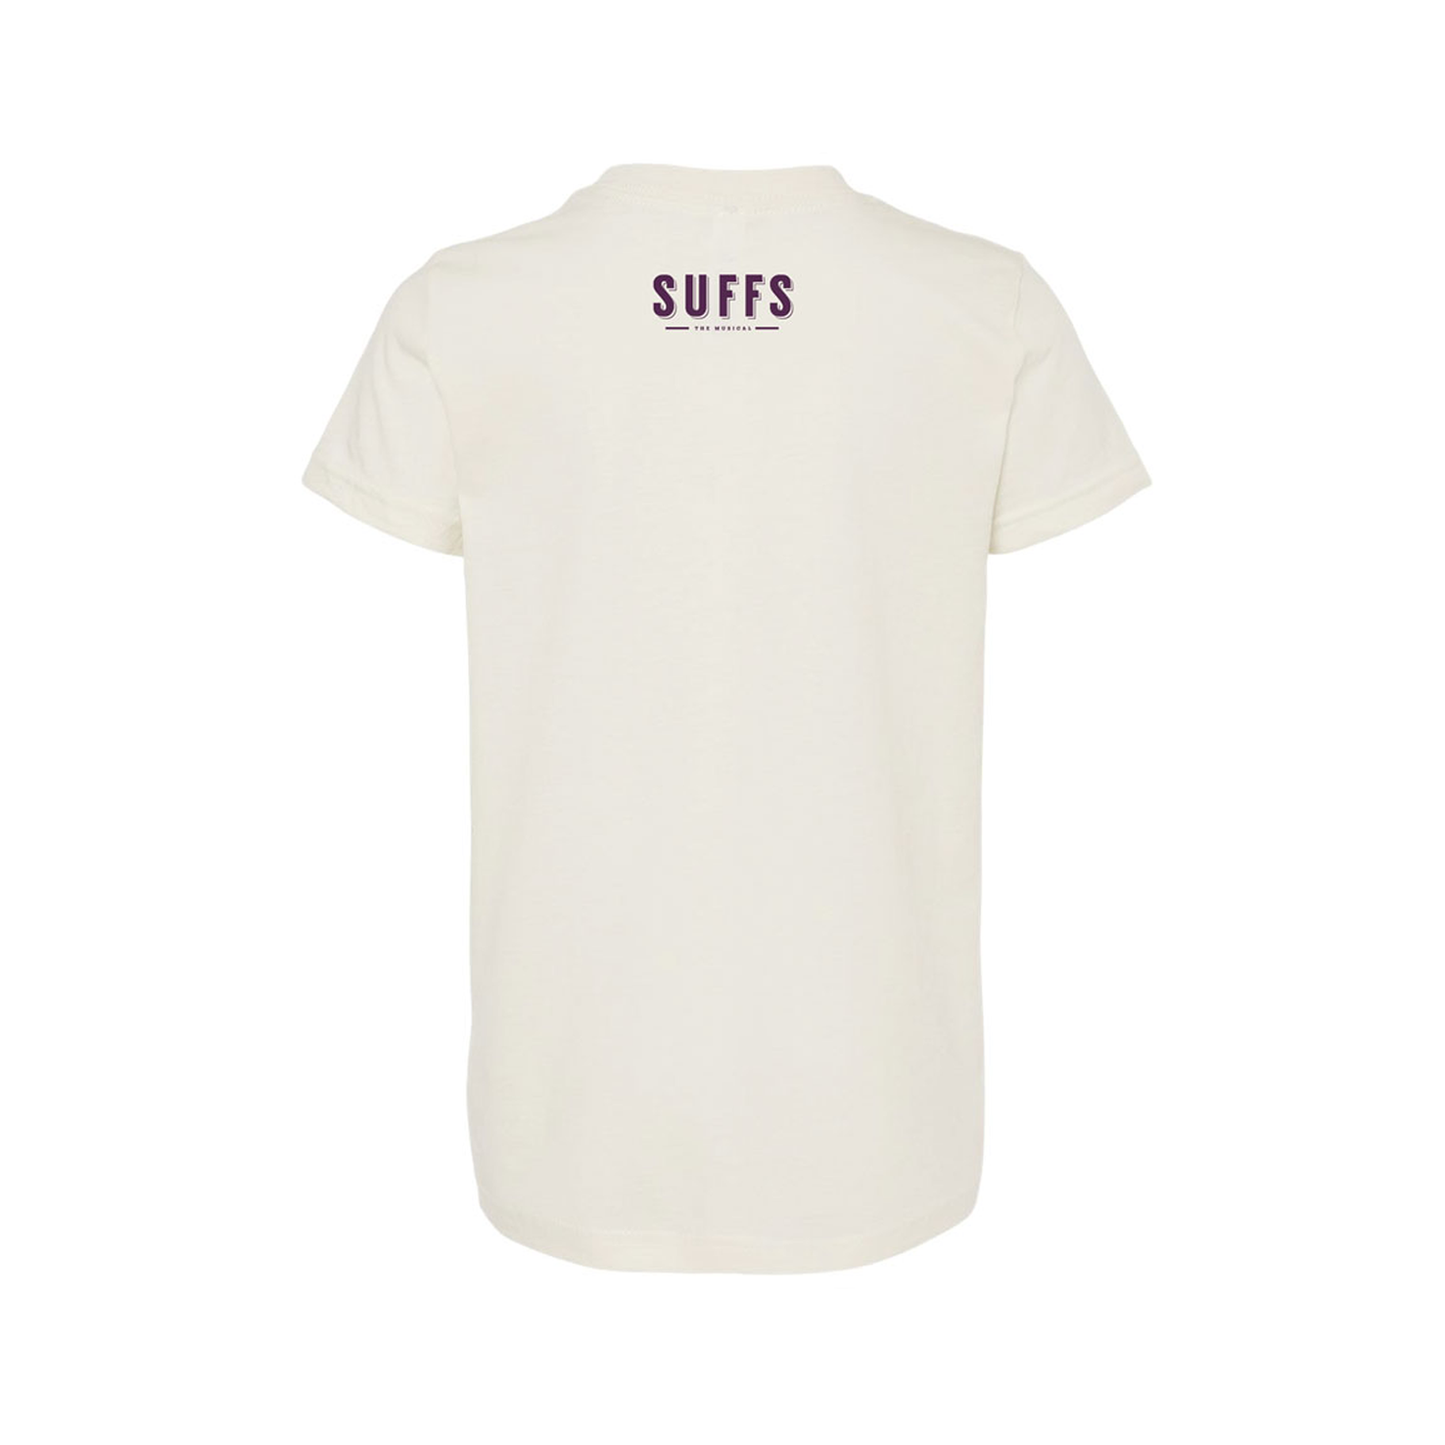 SUFFS Young At The Gates Youth Tee